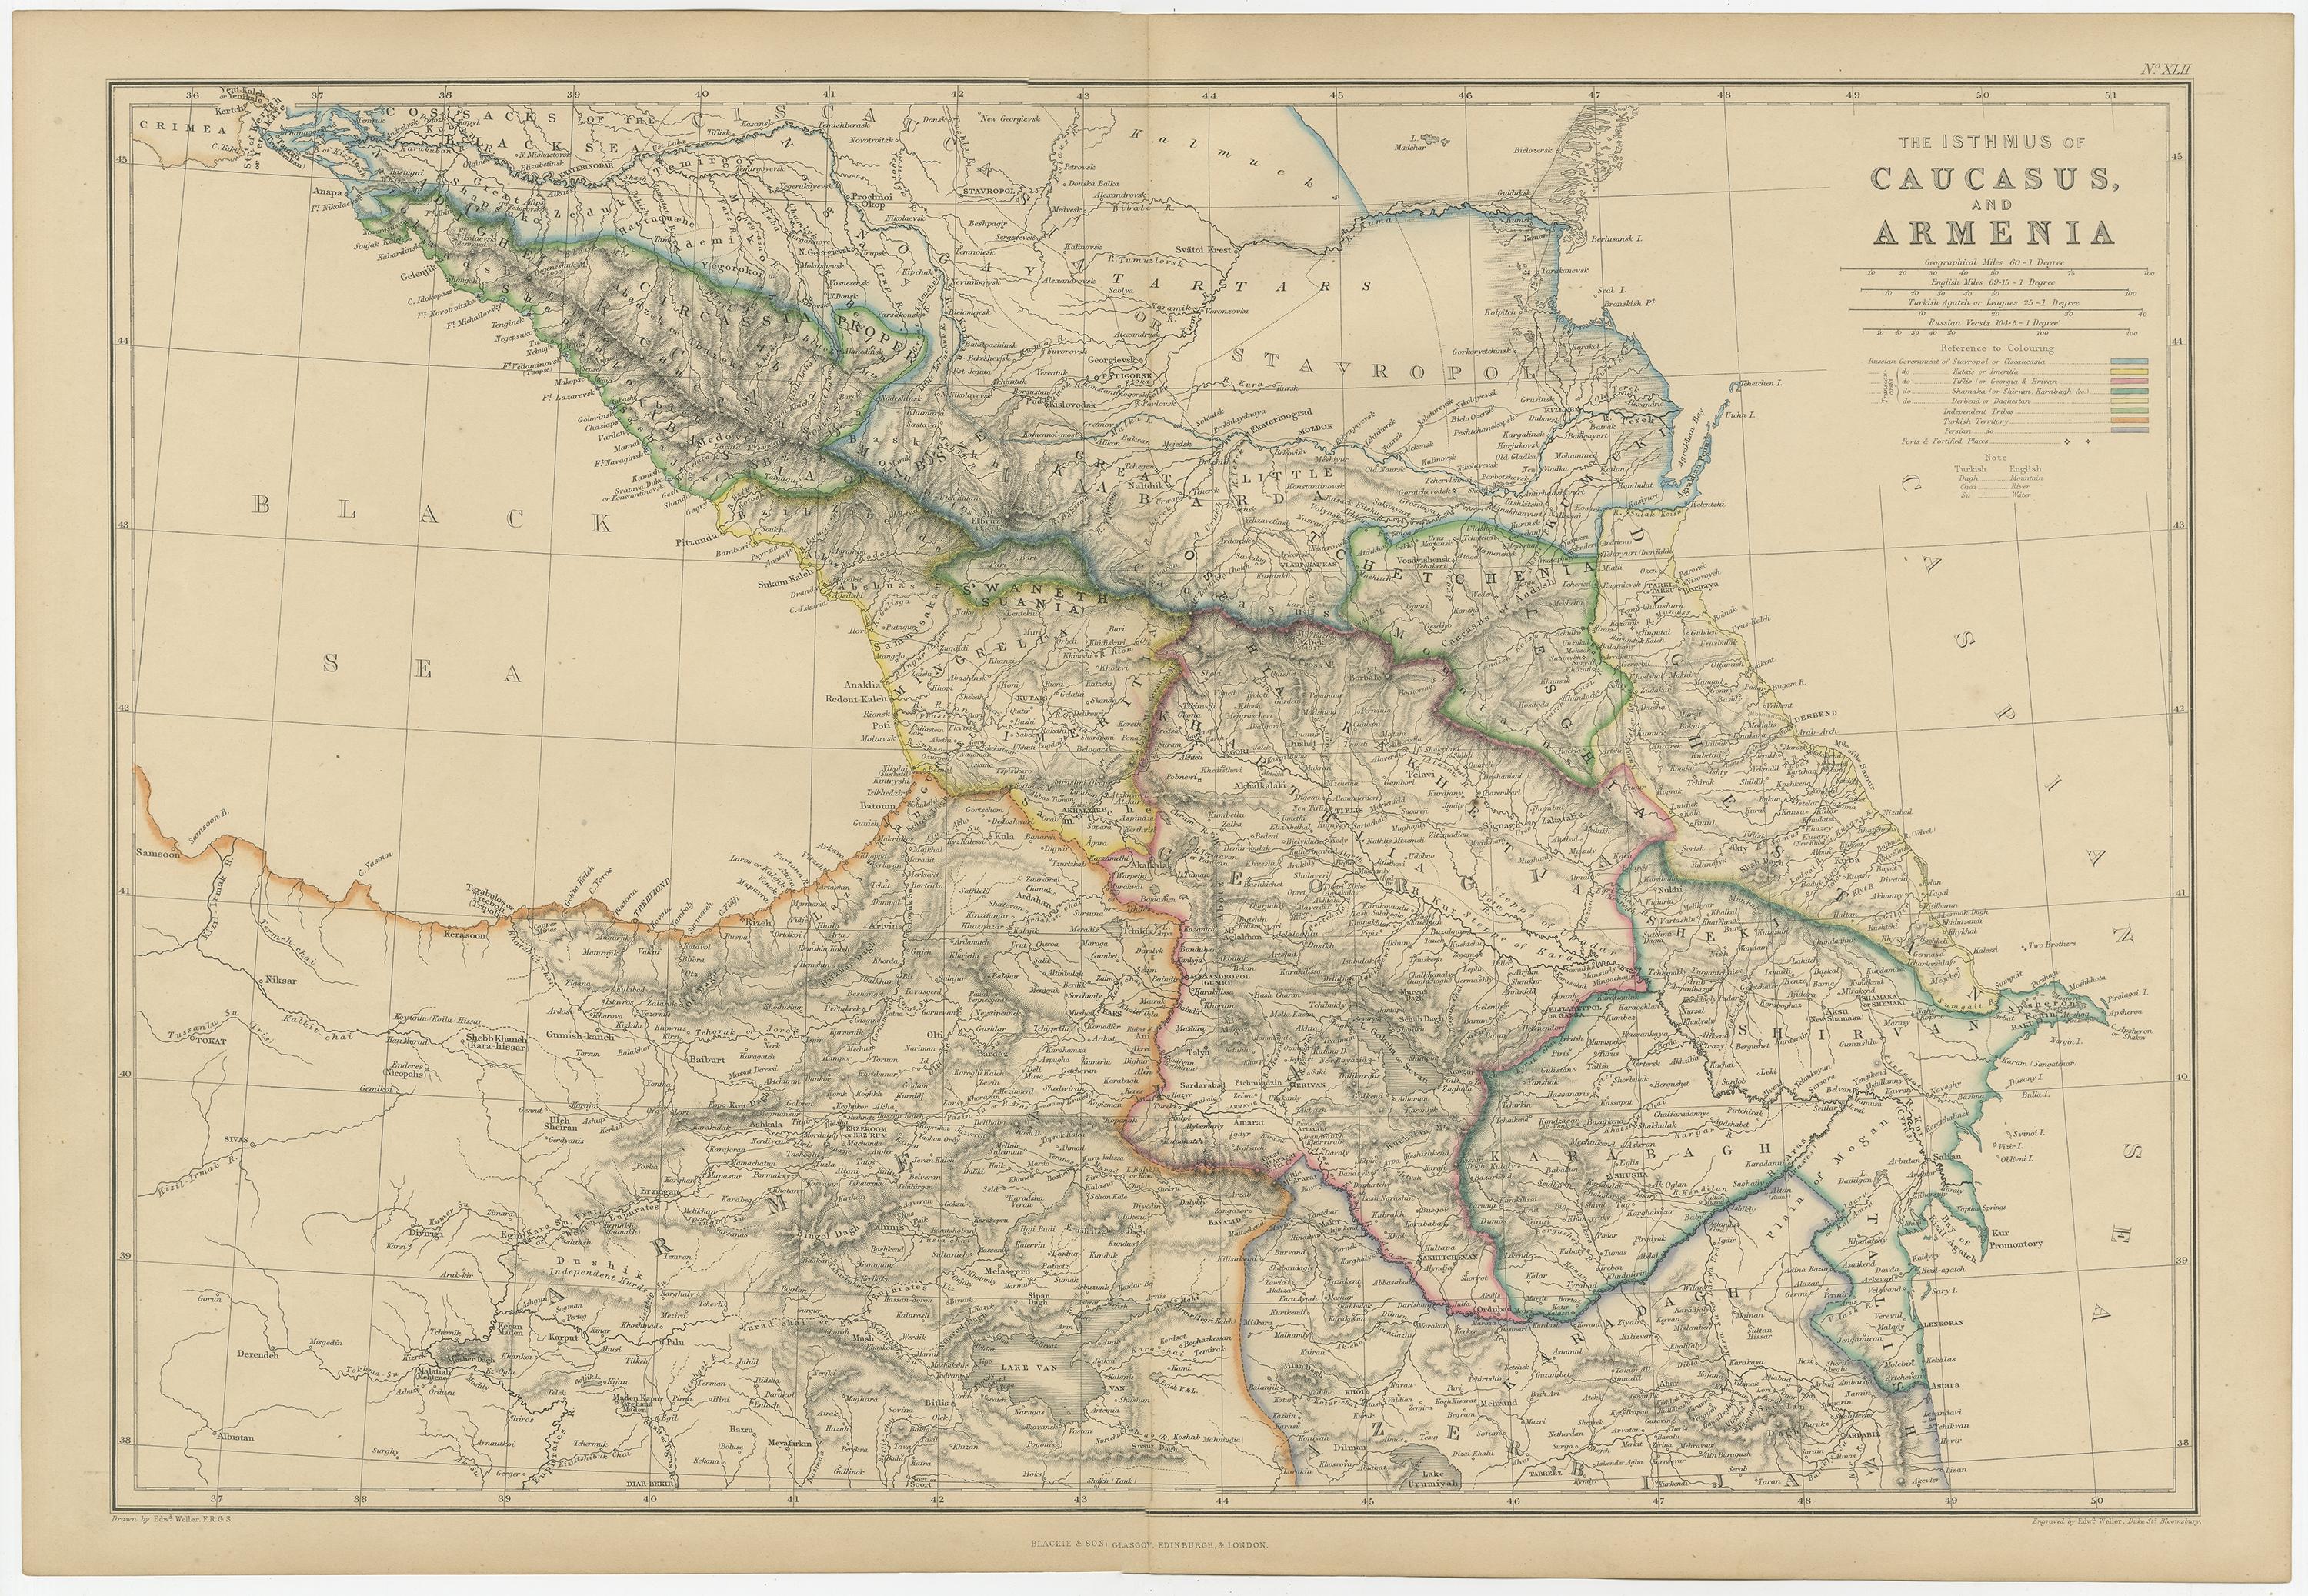 Paper Antique Map of the Caucasus and Armenia by W. G. Blackie, 1859